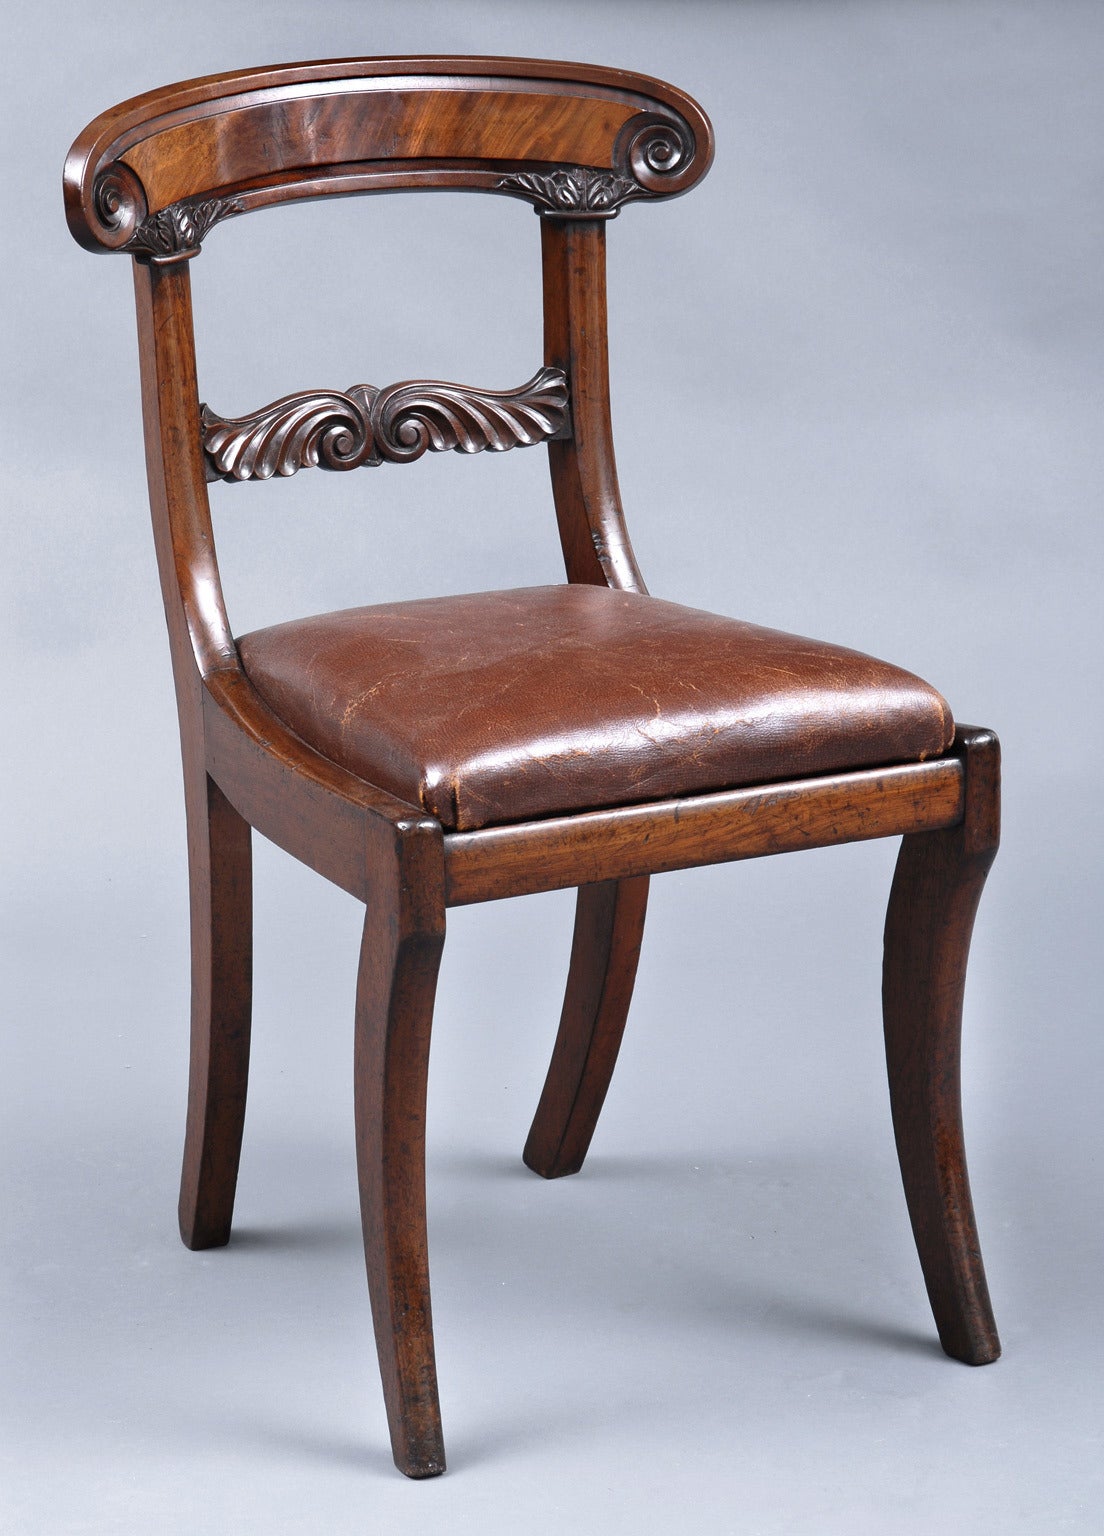 William IV mahogany side chair with curved top rail carved with scroll terminals, splat with carved leaf decoration, sabre legs, brown leather upholstered drop-in seat.

 